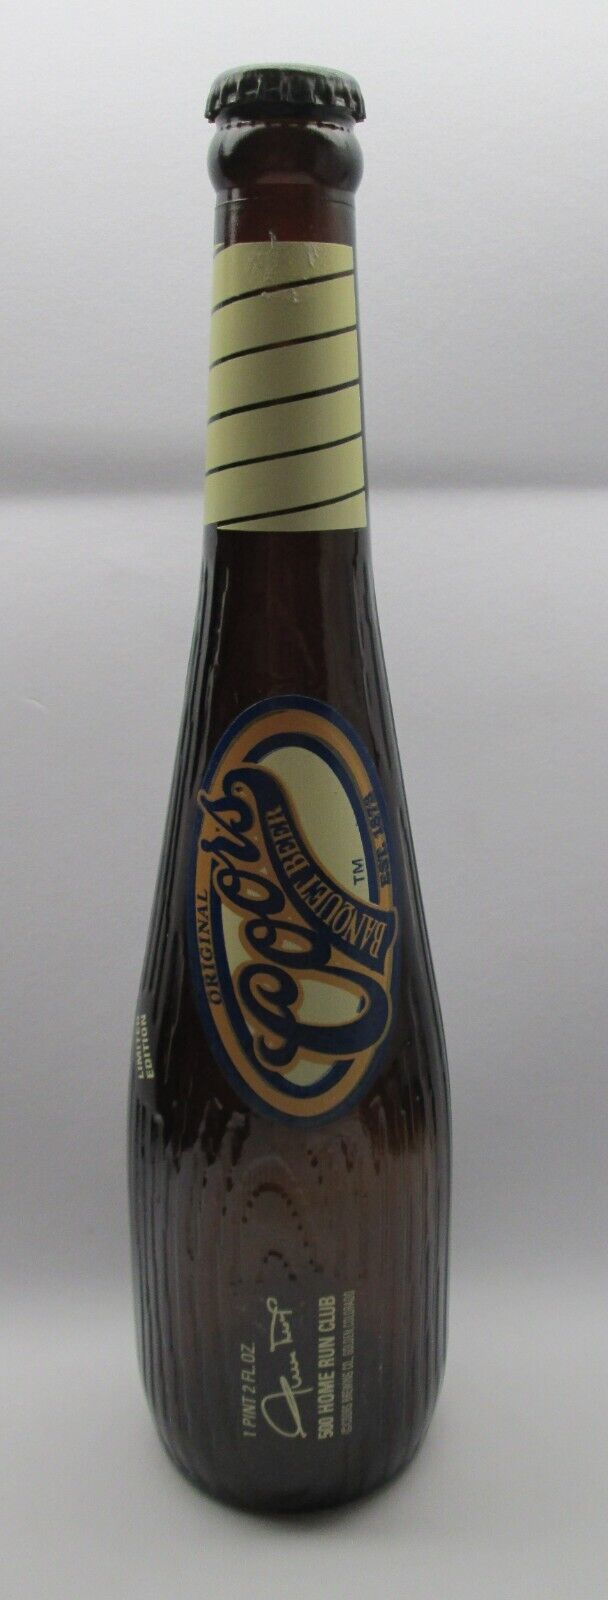 Willie Mays Commemorative 1997 Coors 18 oz. Bottle 500 Home Run Club EMPTY w/cap